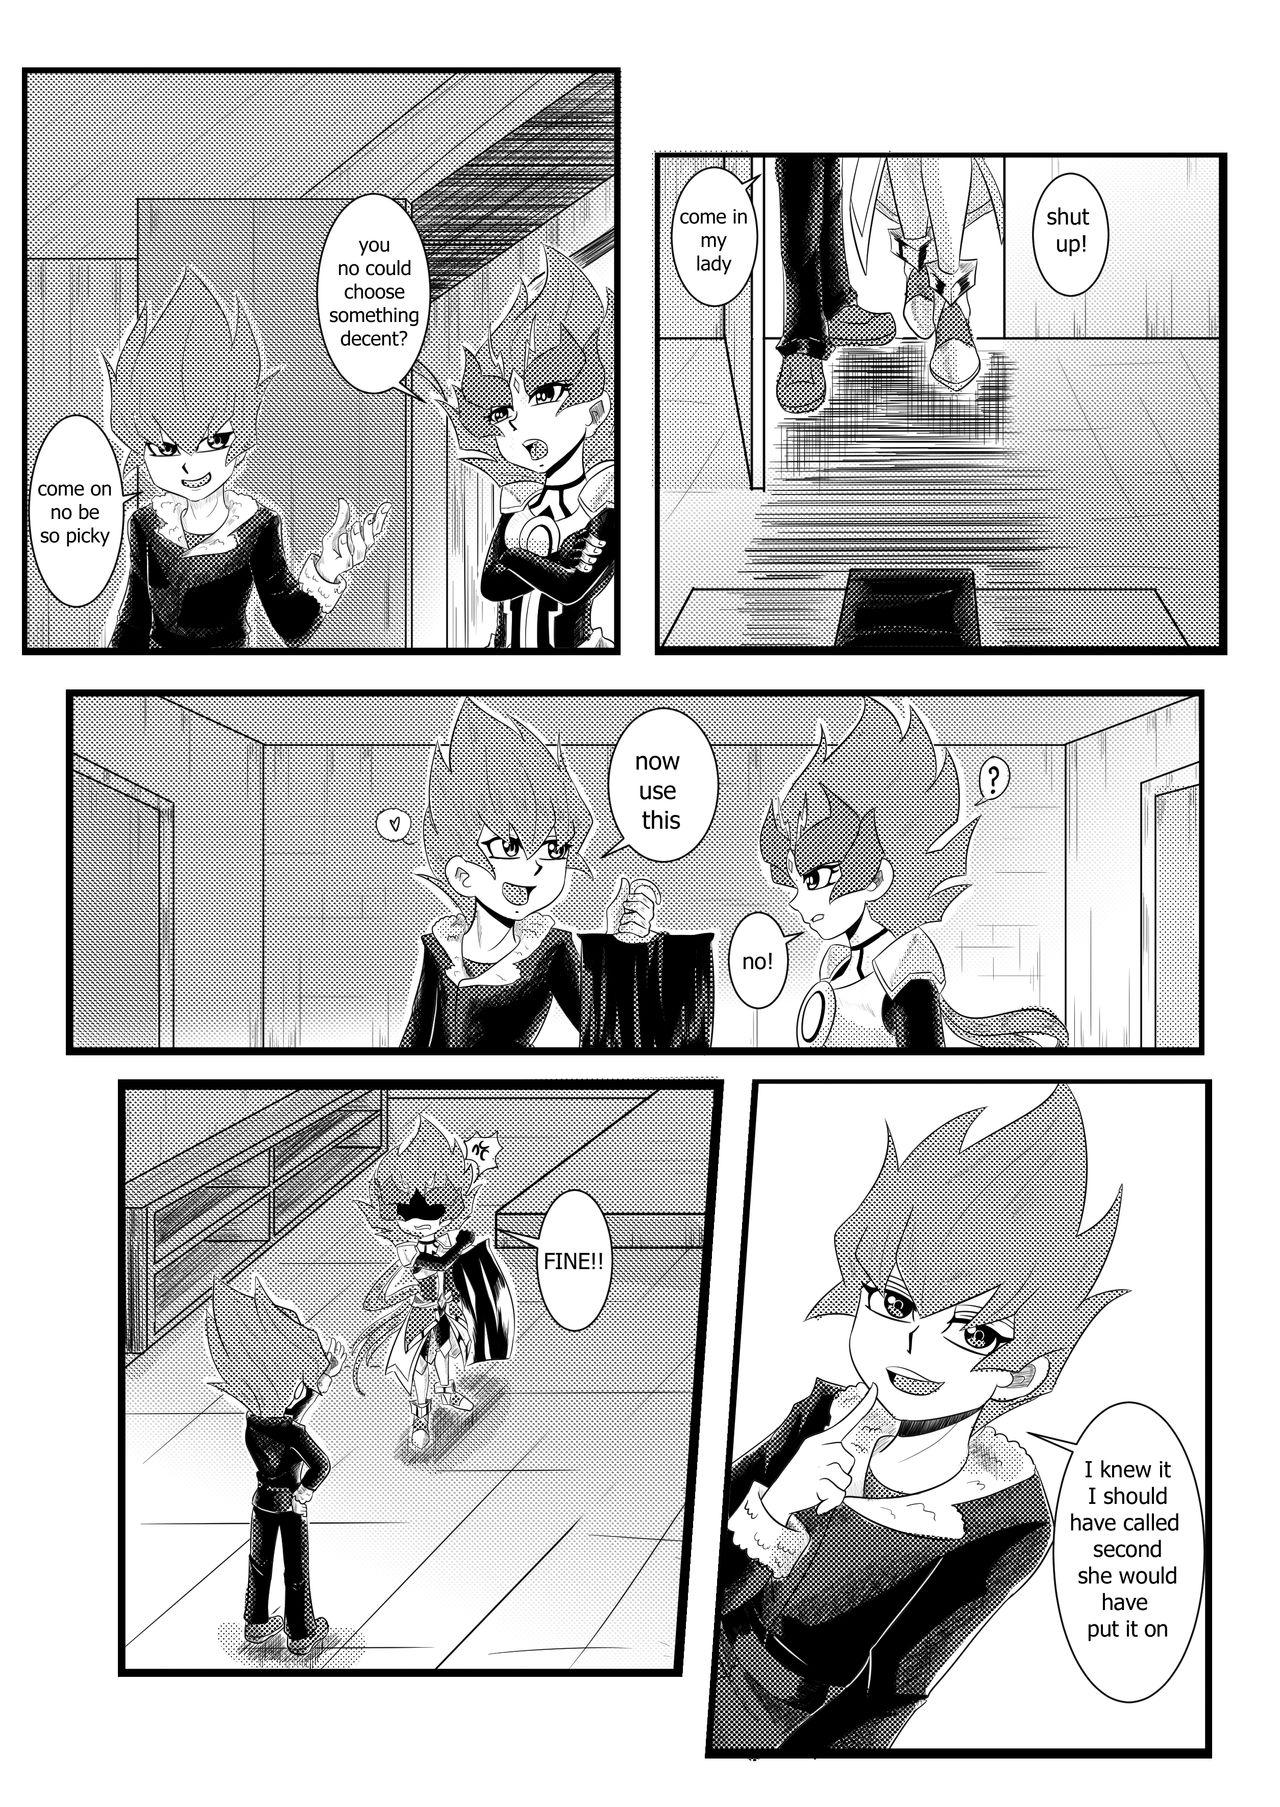 Hot Fuck For Her - Yu-gi-oh zexal Hair - Page 10